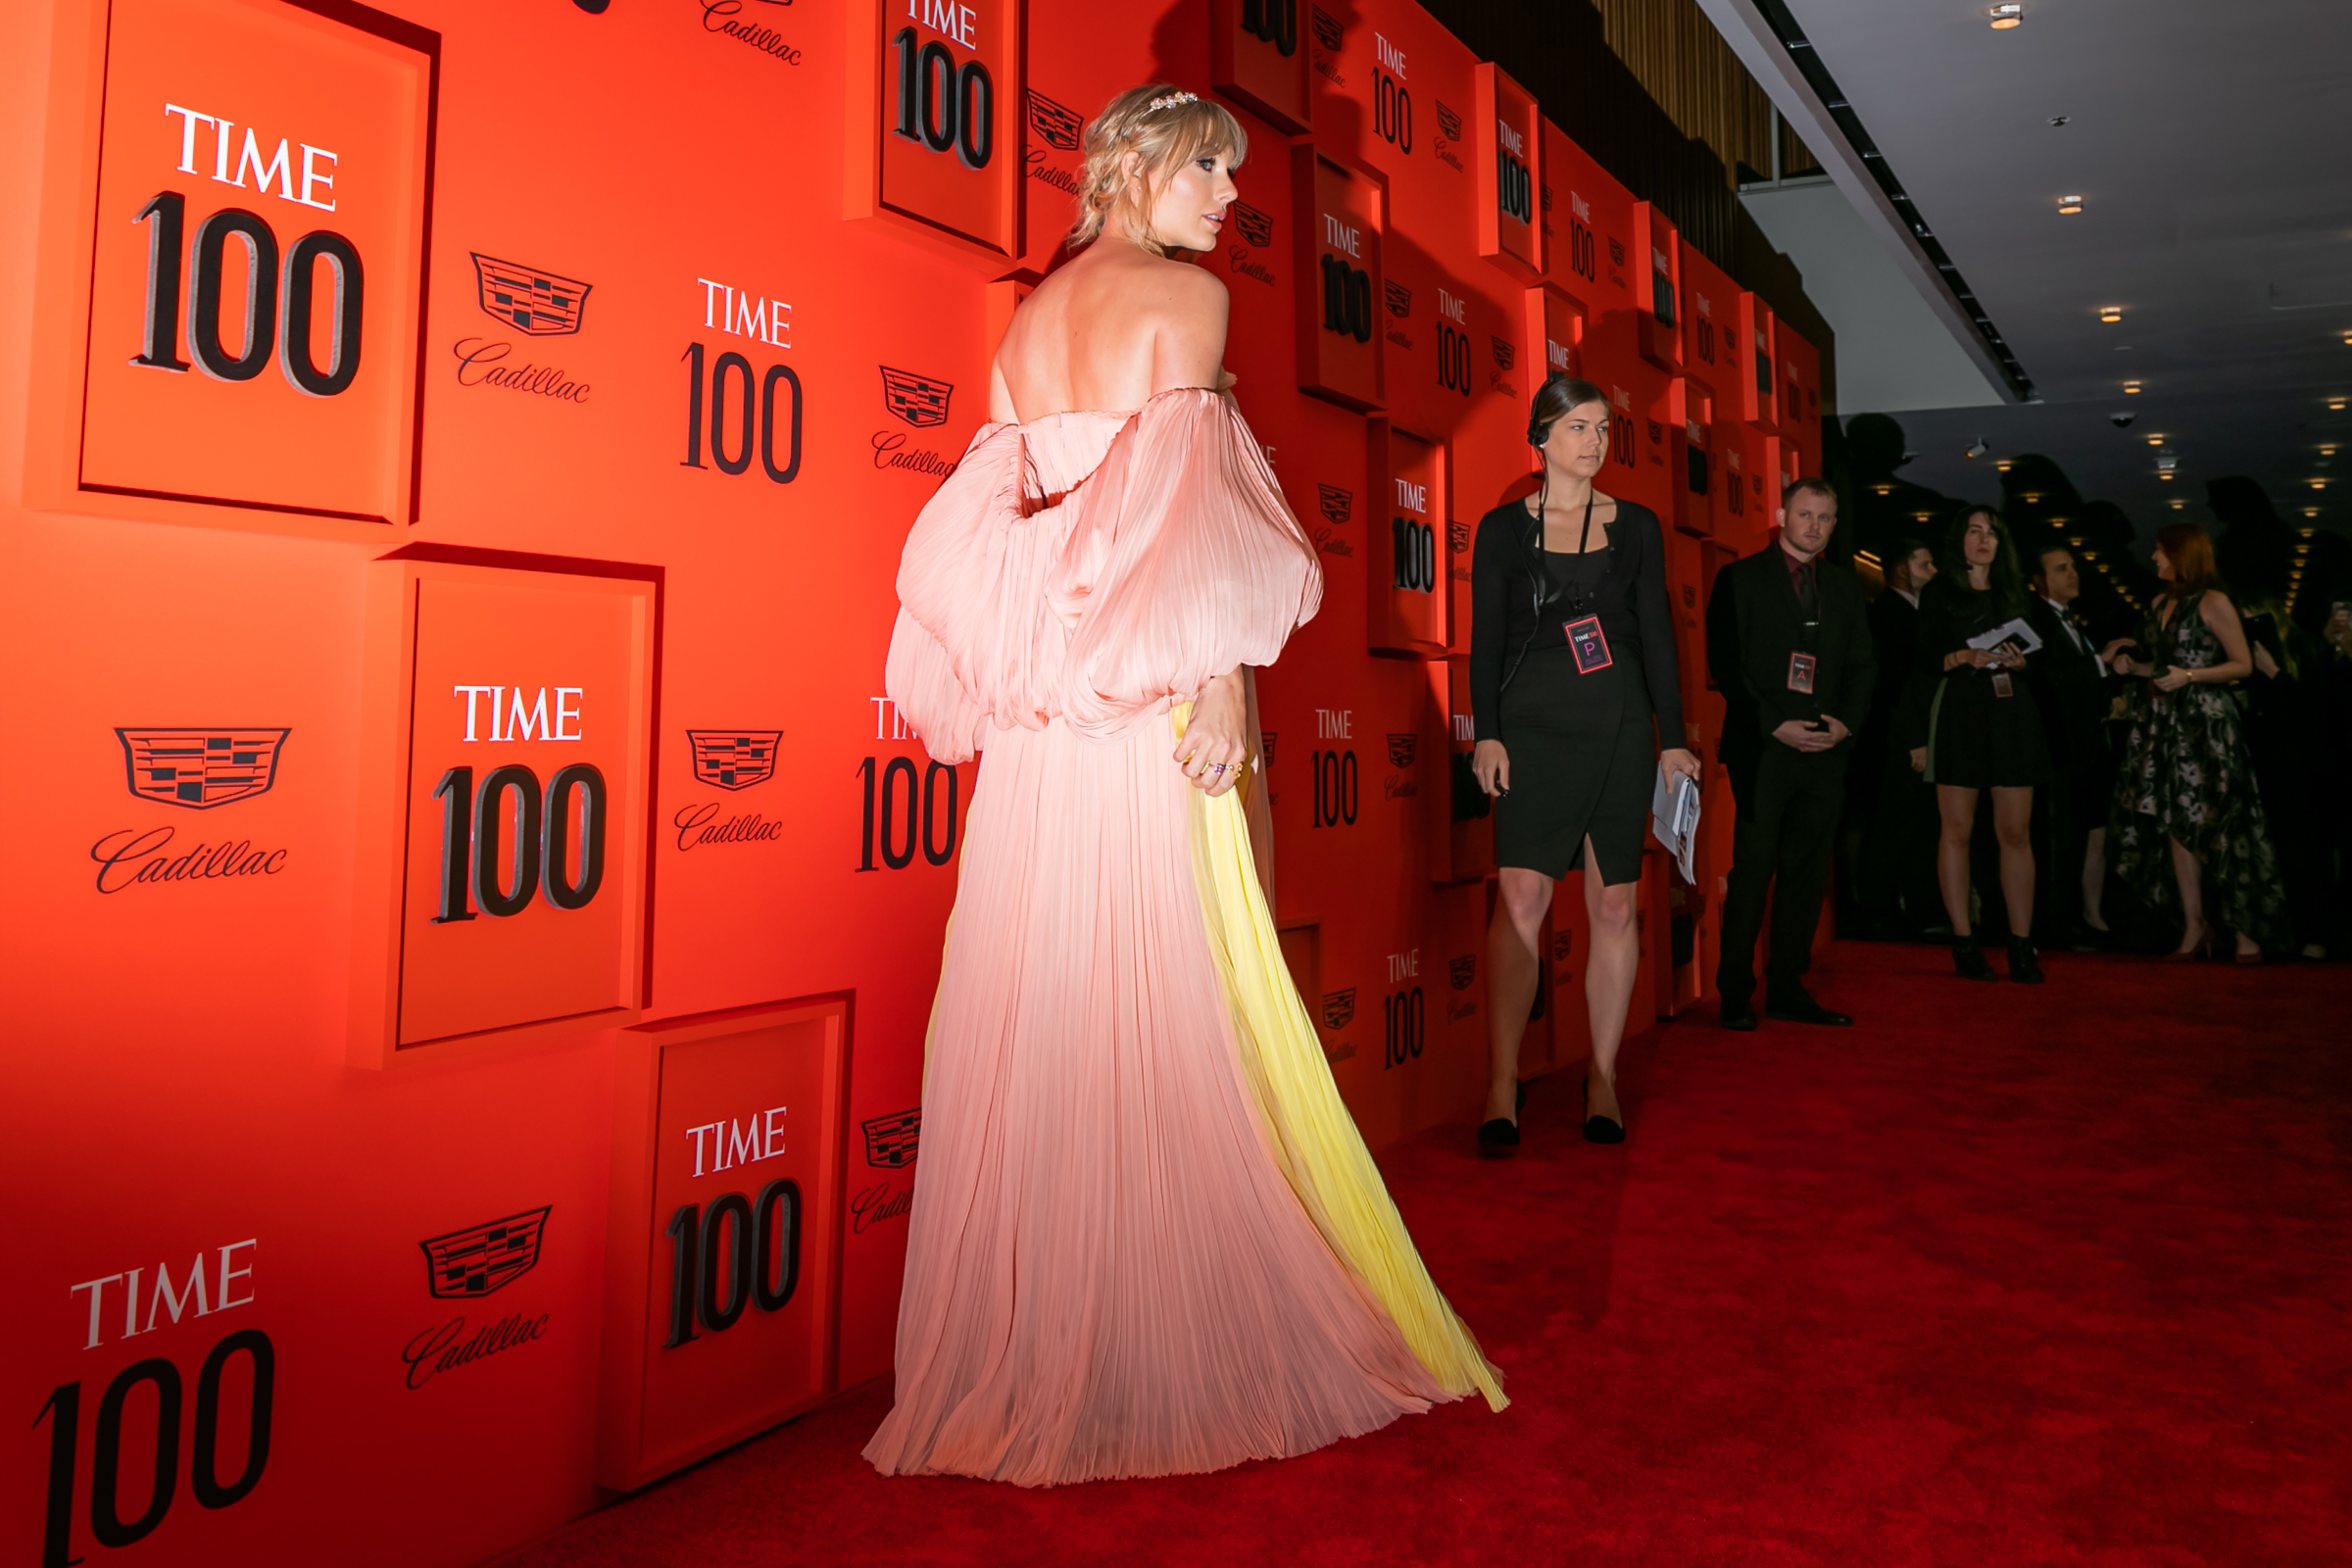 Taylor Swift at the Time 100 Gala at Jazz at Lincoln Center in New York City on April 23, 2019. (Kevin Tachman for TIME)